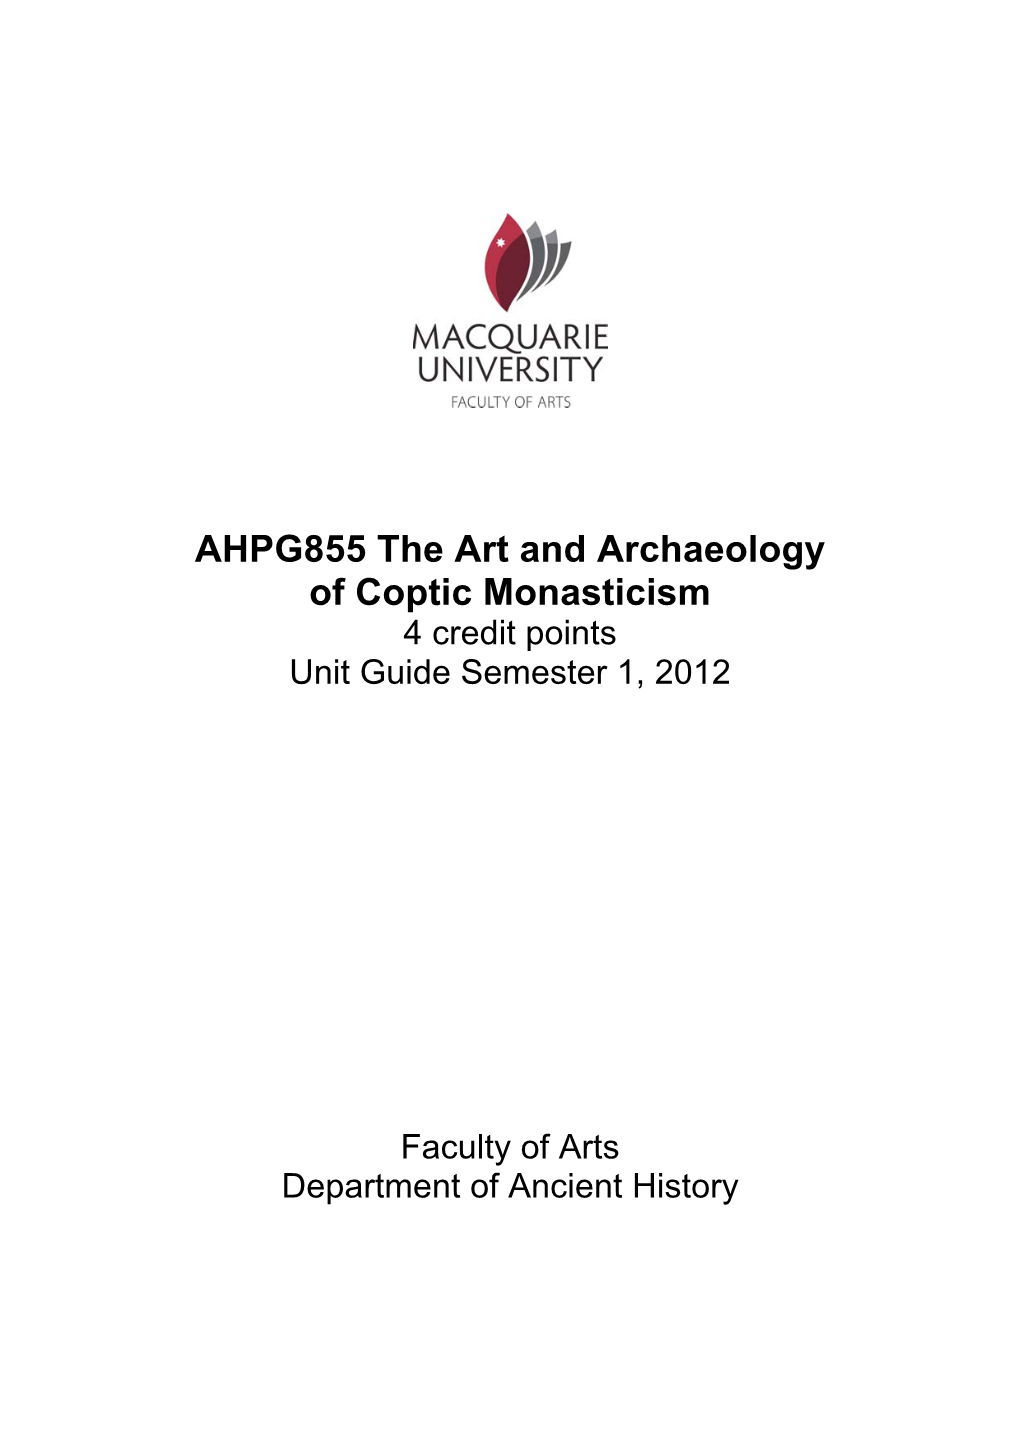 AHPG855 the Art and Archaeology of Coptic Monasticism 4 Credit Points Unit Guide Semester 1, 2012